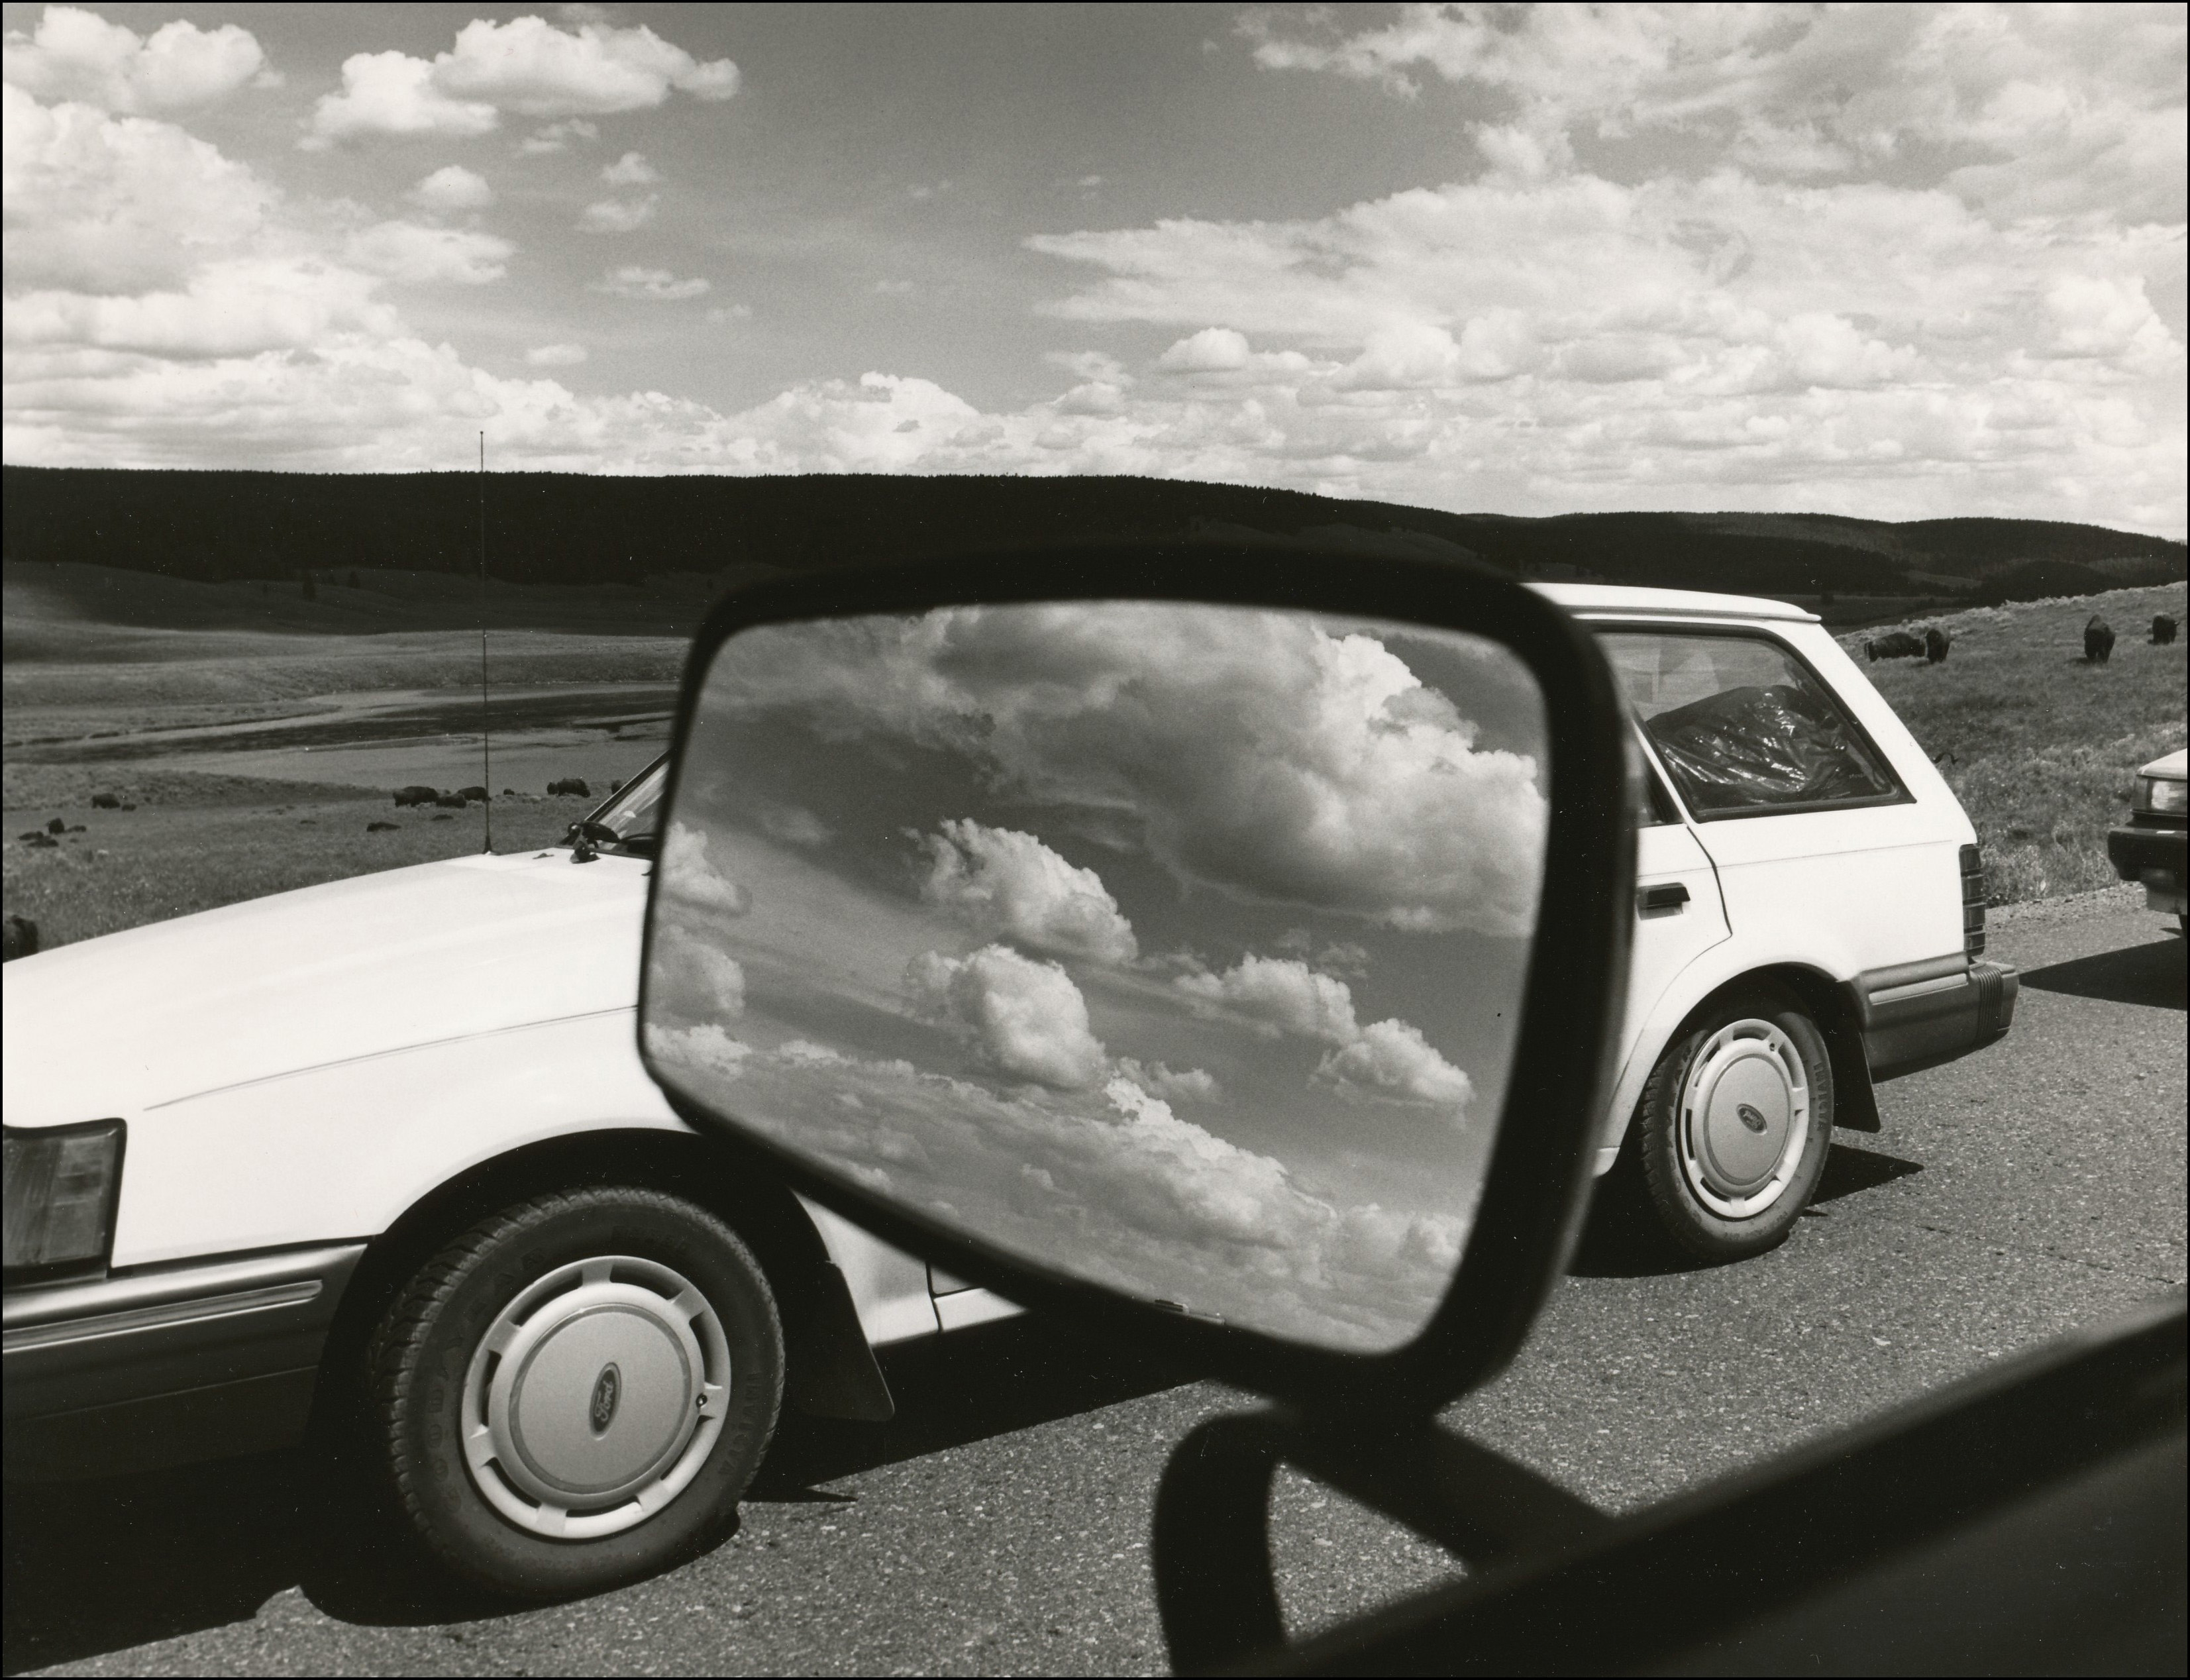 Looking out of a car window with clouds in the mirror, a white car on the other side of the road and in the background buffalo grazing in an open area